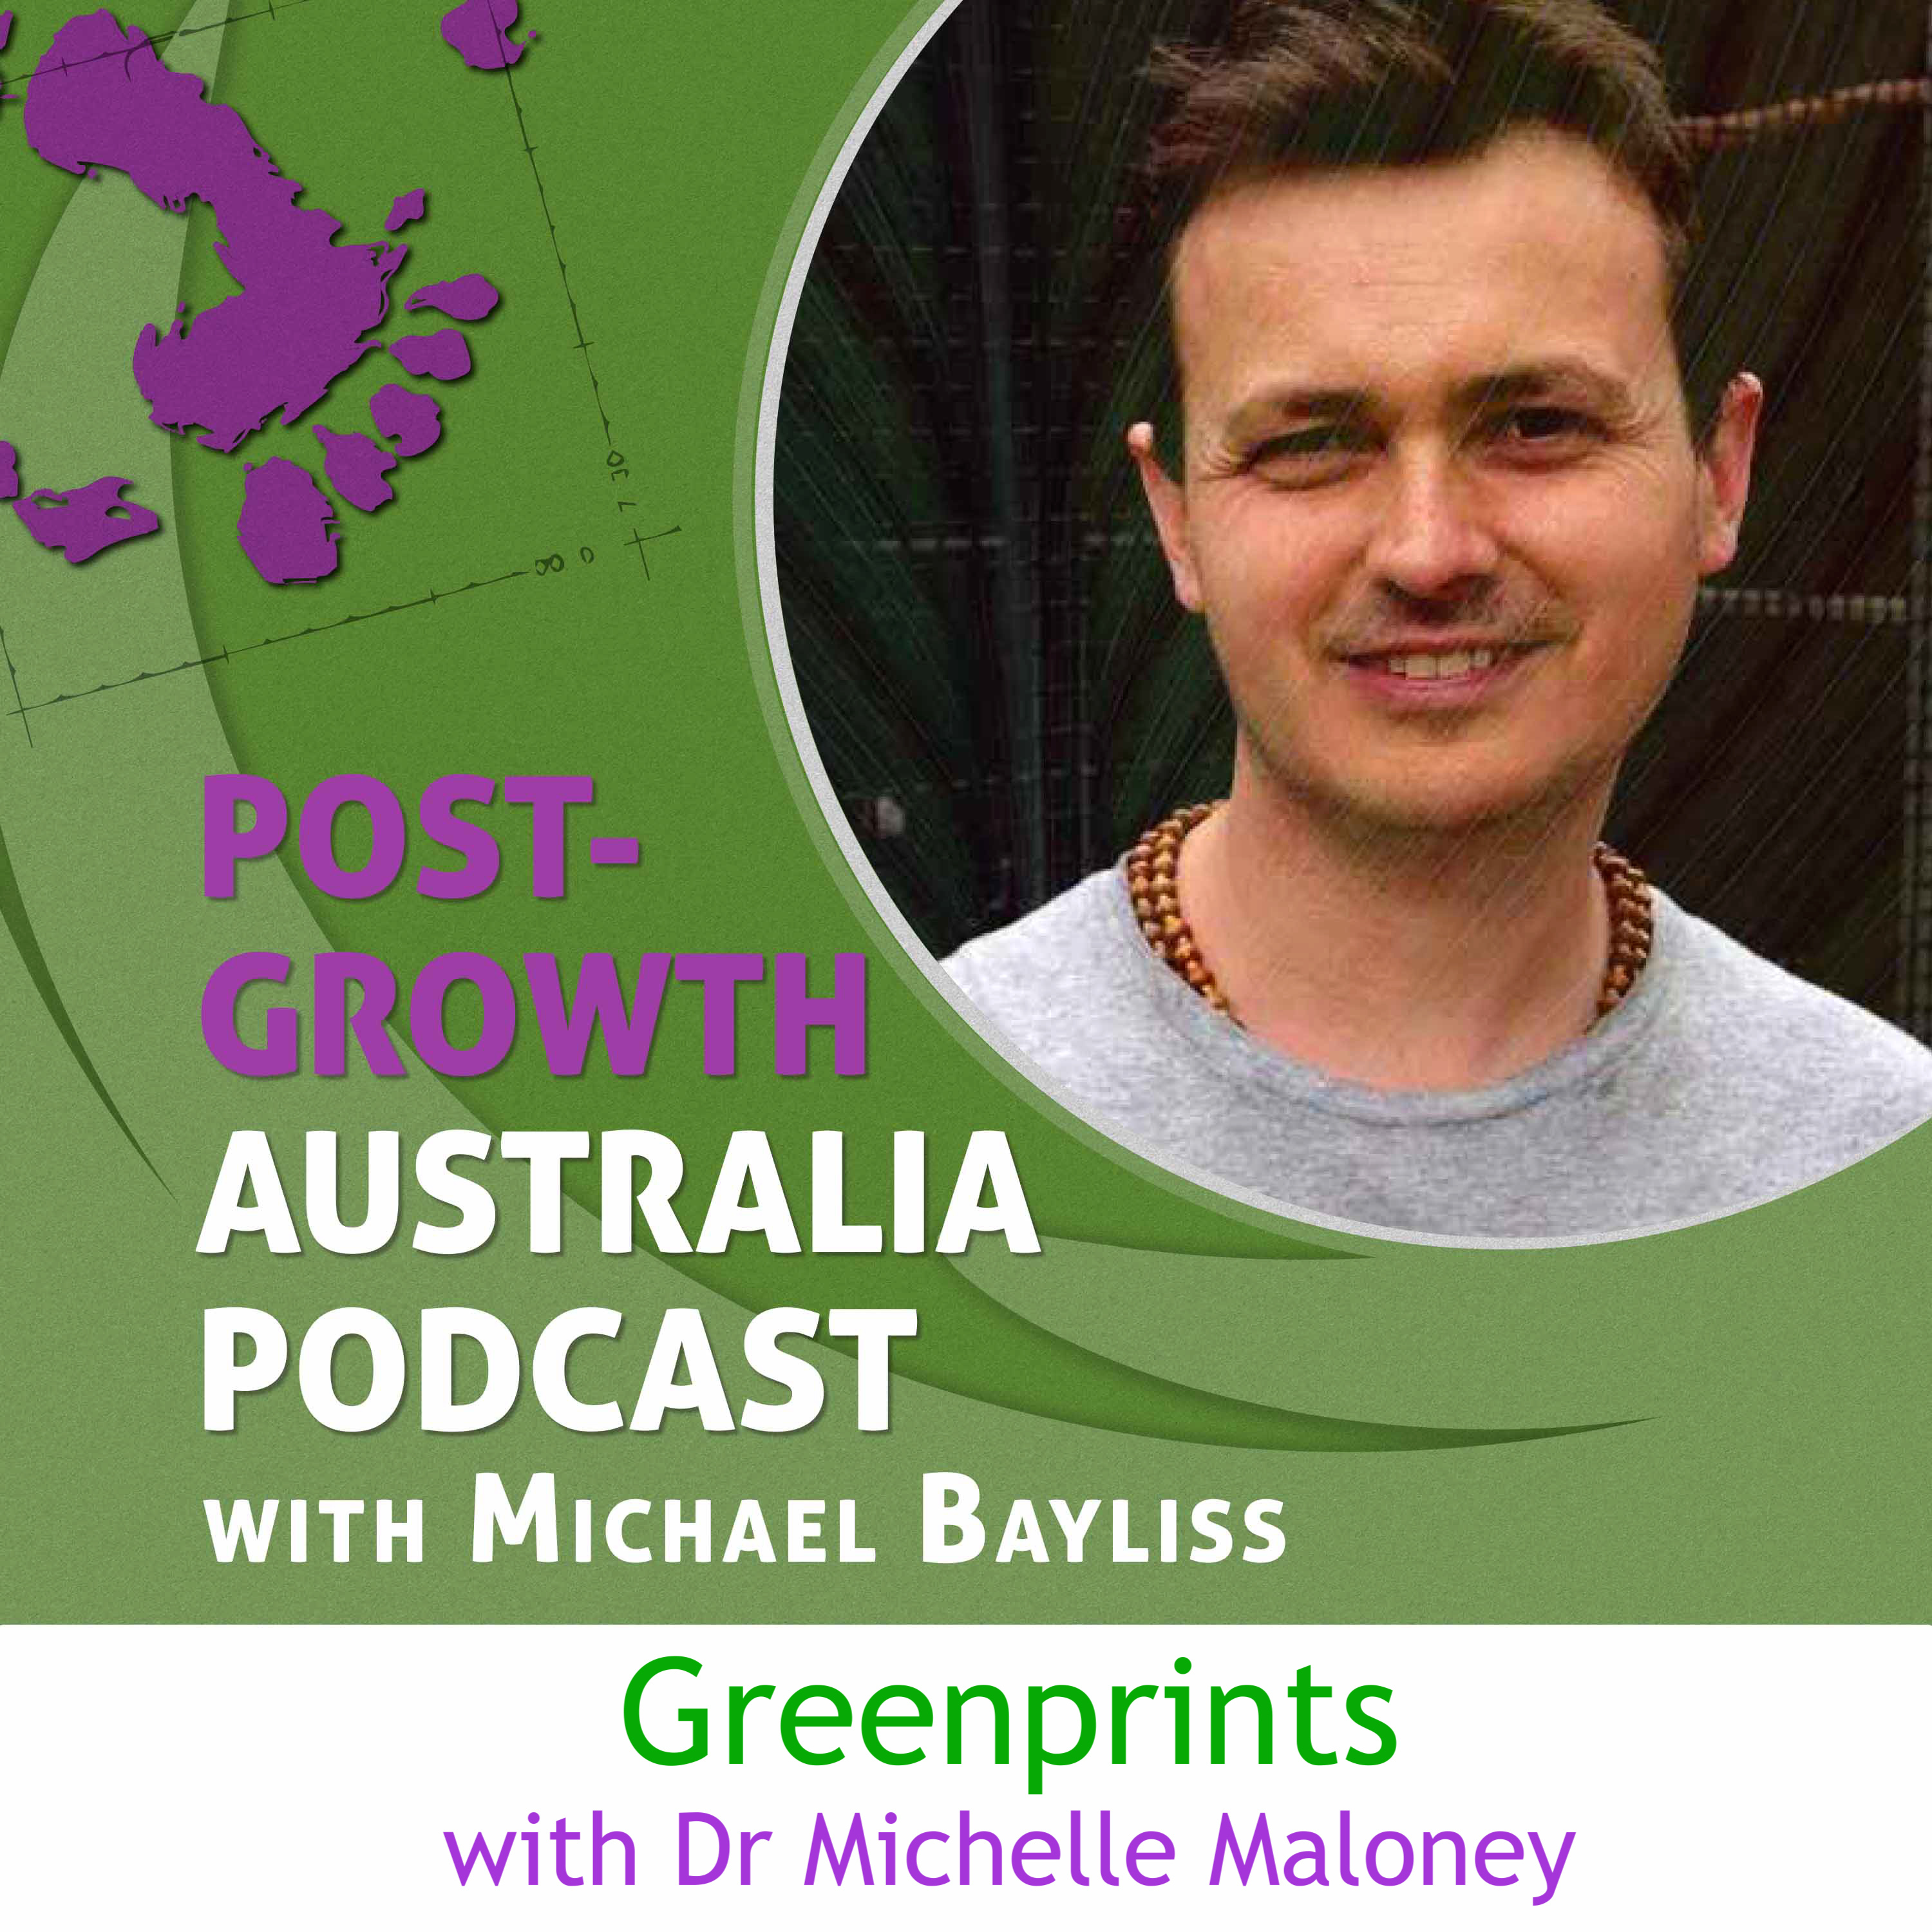 Greenprints with Dr Michelle Maloney